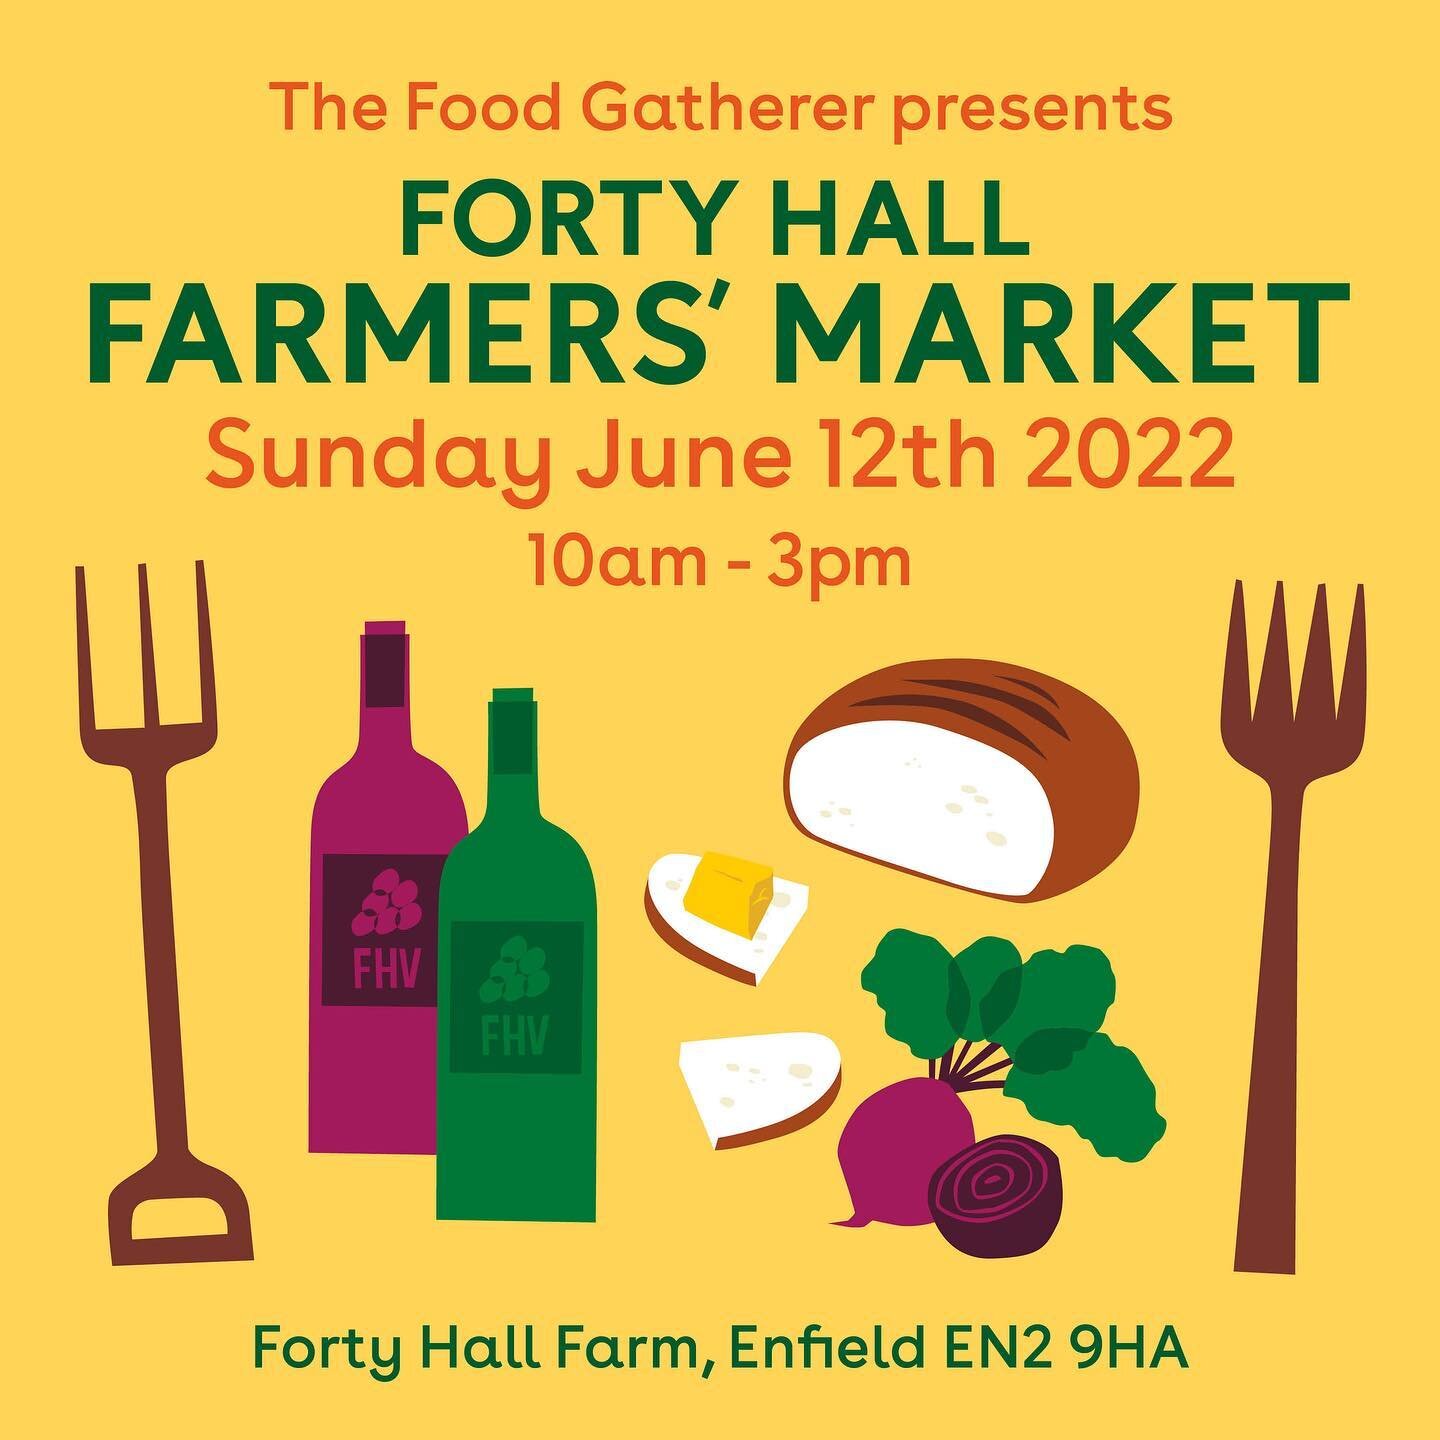 Next Sunday!  Join us for our monthly dose of great local food, drink and community spirit ! Forty Hall Farmers&rsquo; Market @fortyhallfarm 10am to 3pm - Free entry, dogs welcome on leads - hope to see you there! #fhfmarket #enfieldtofork